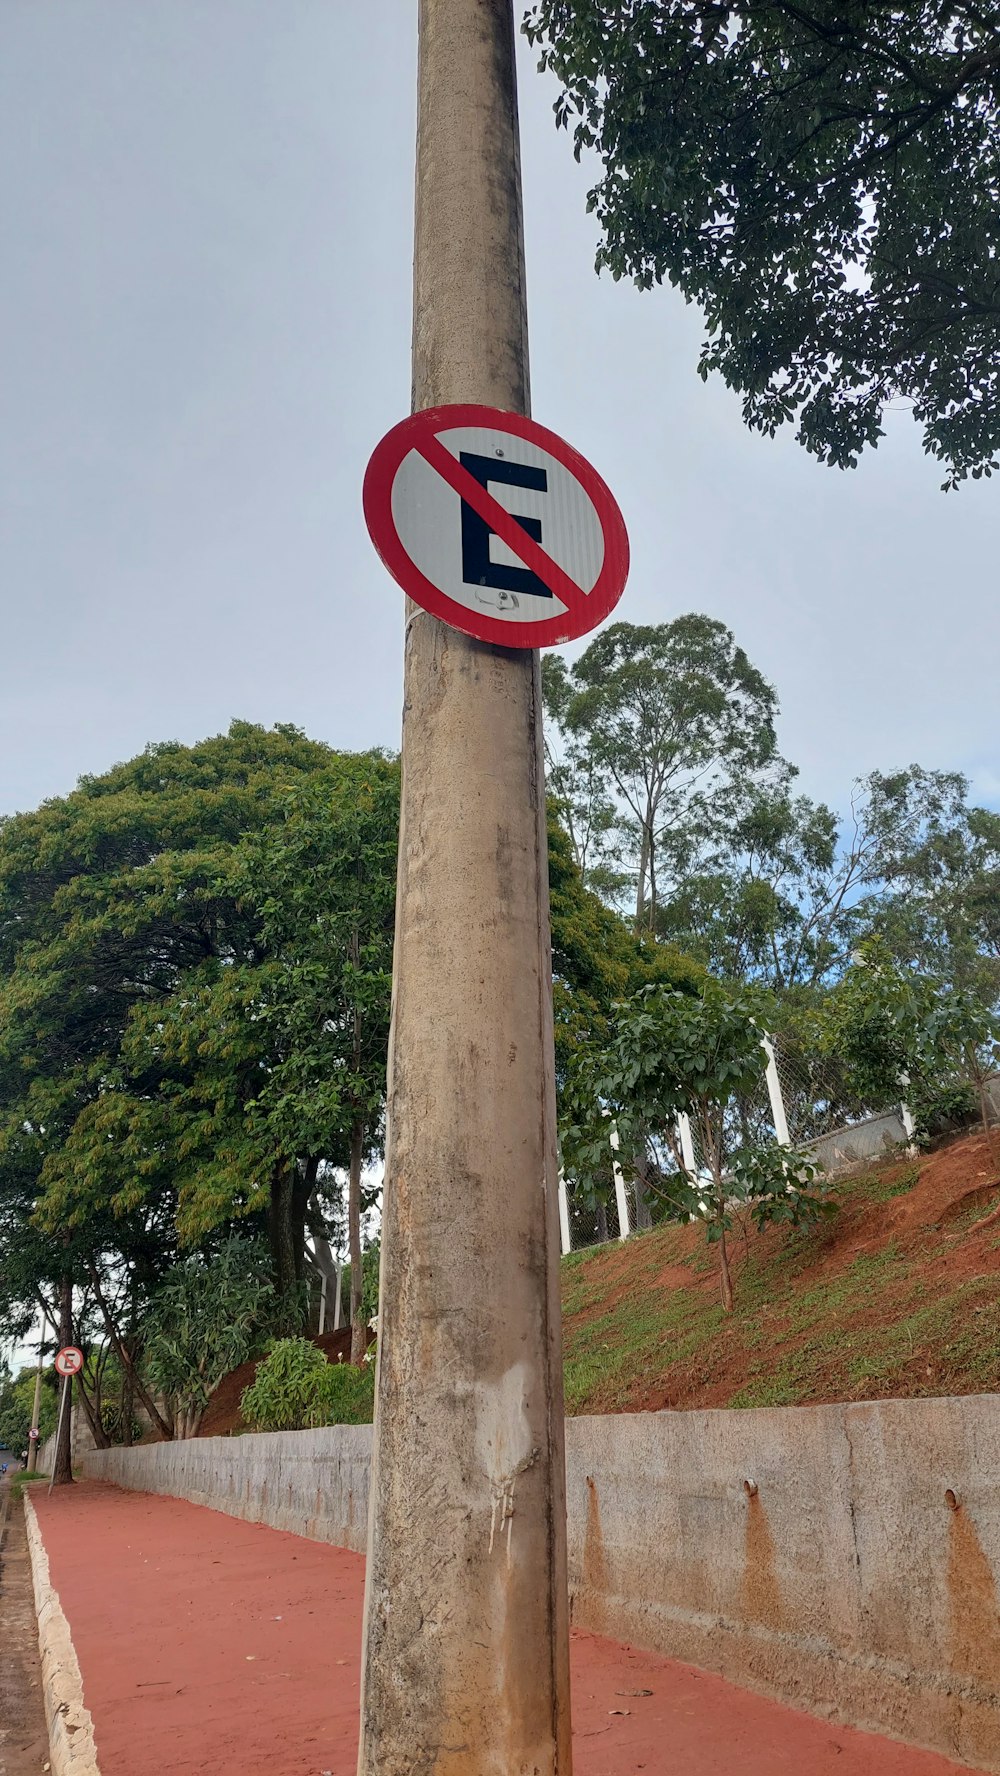 a no left turn sign on a pole